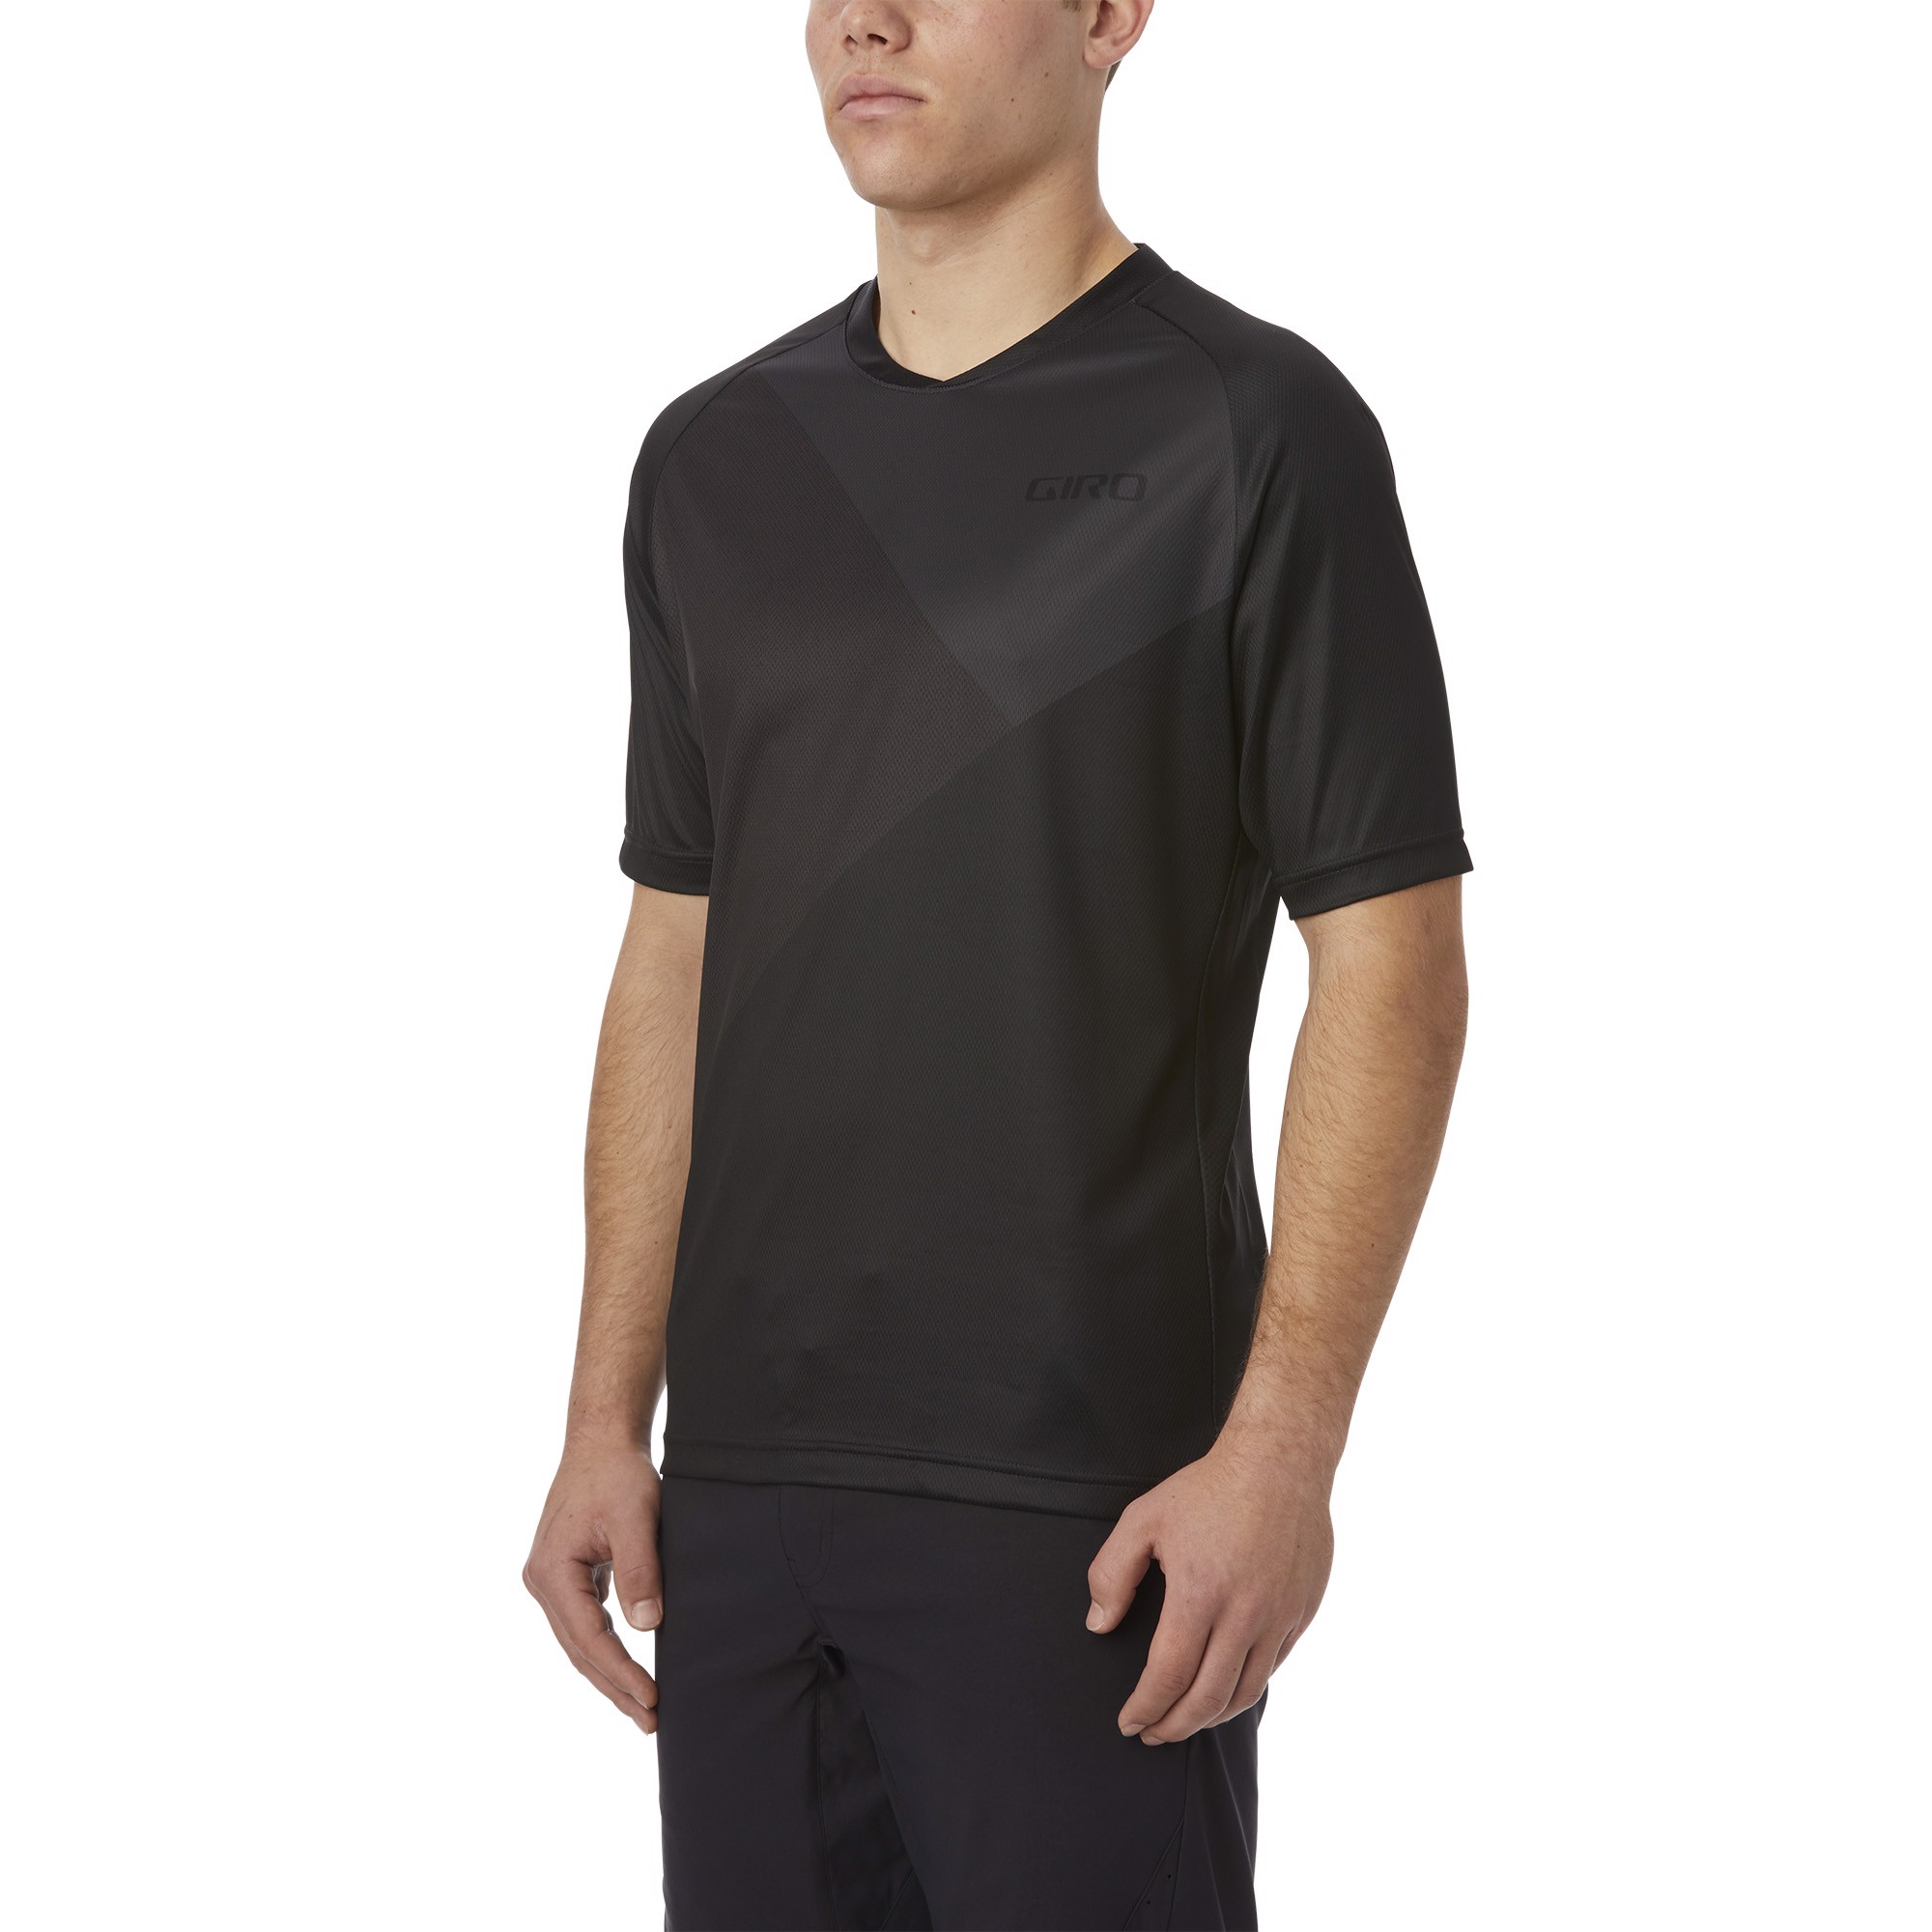 giro-roust-jersey-mens-dirt-apparel-black-charcoal-shadow-side_master